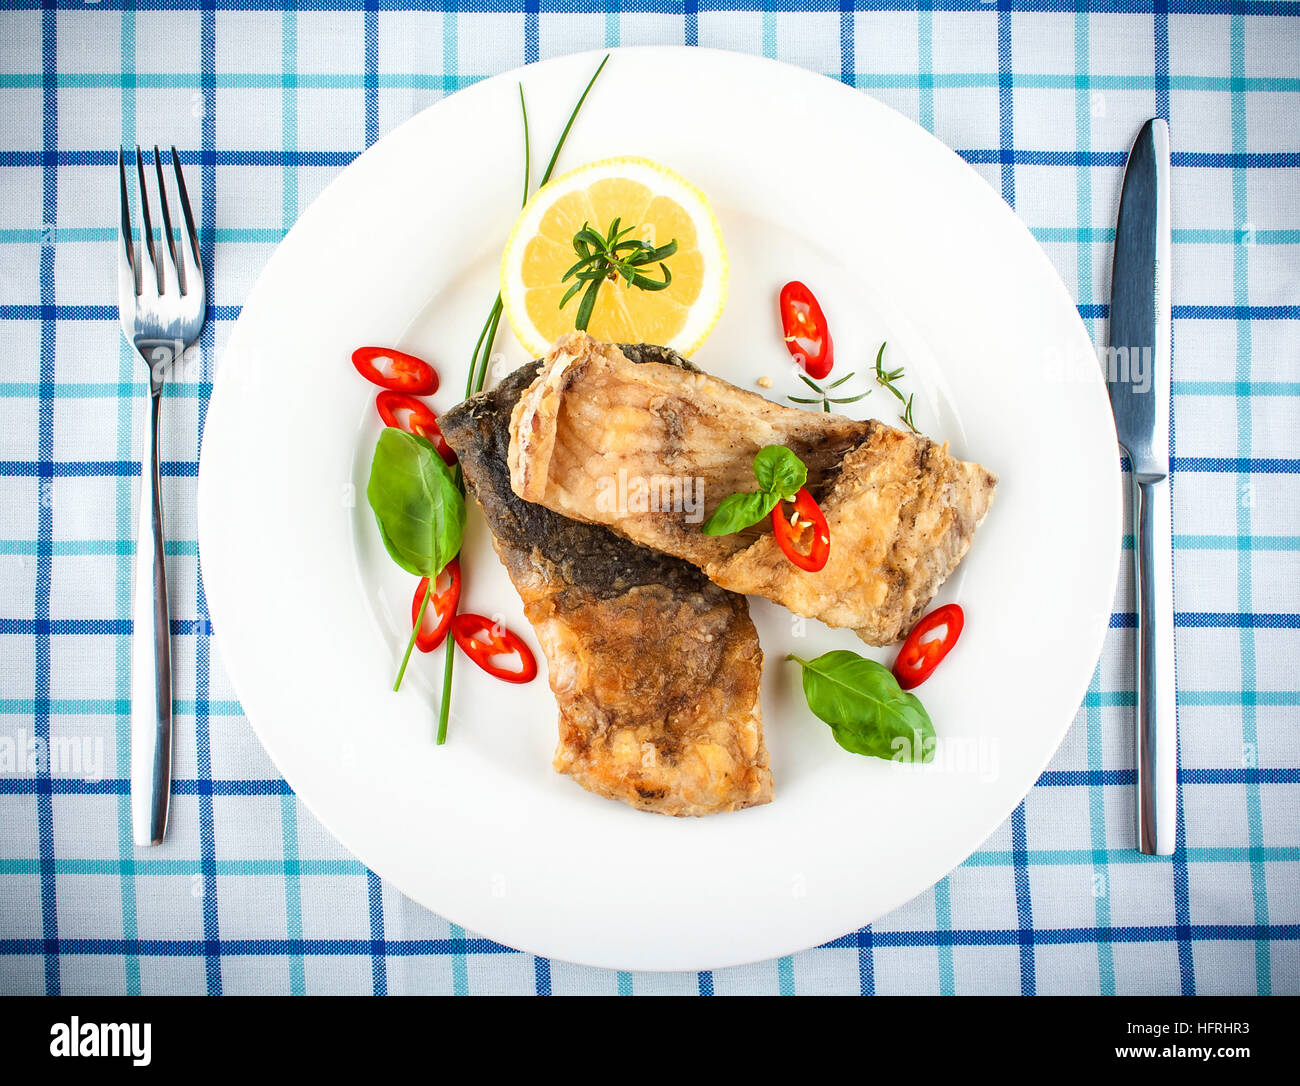 Fried fish on white plate and fork, knife, close up Stock Photo